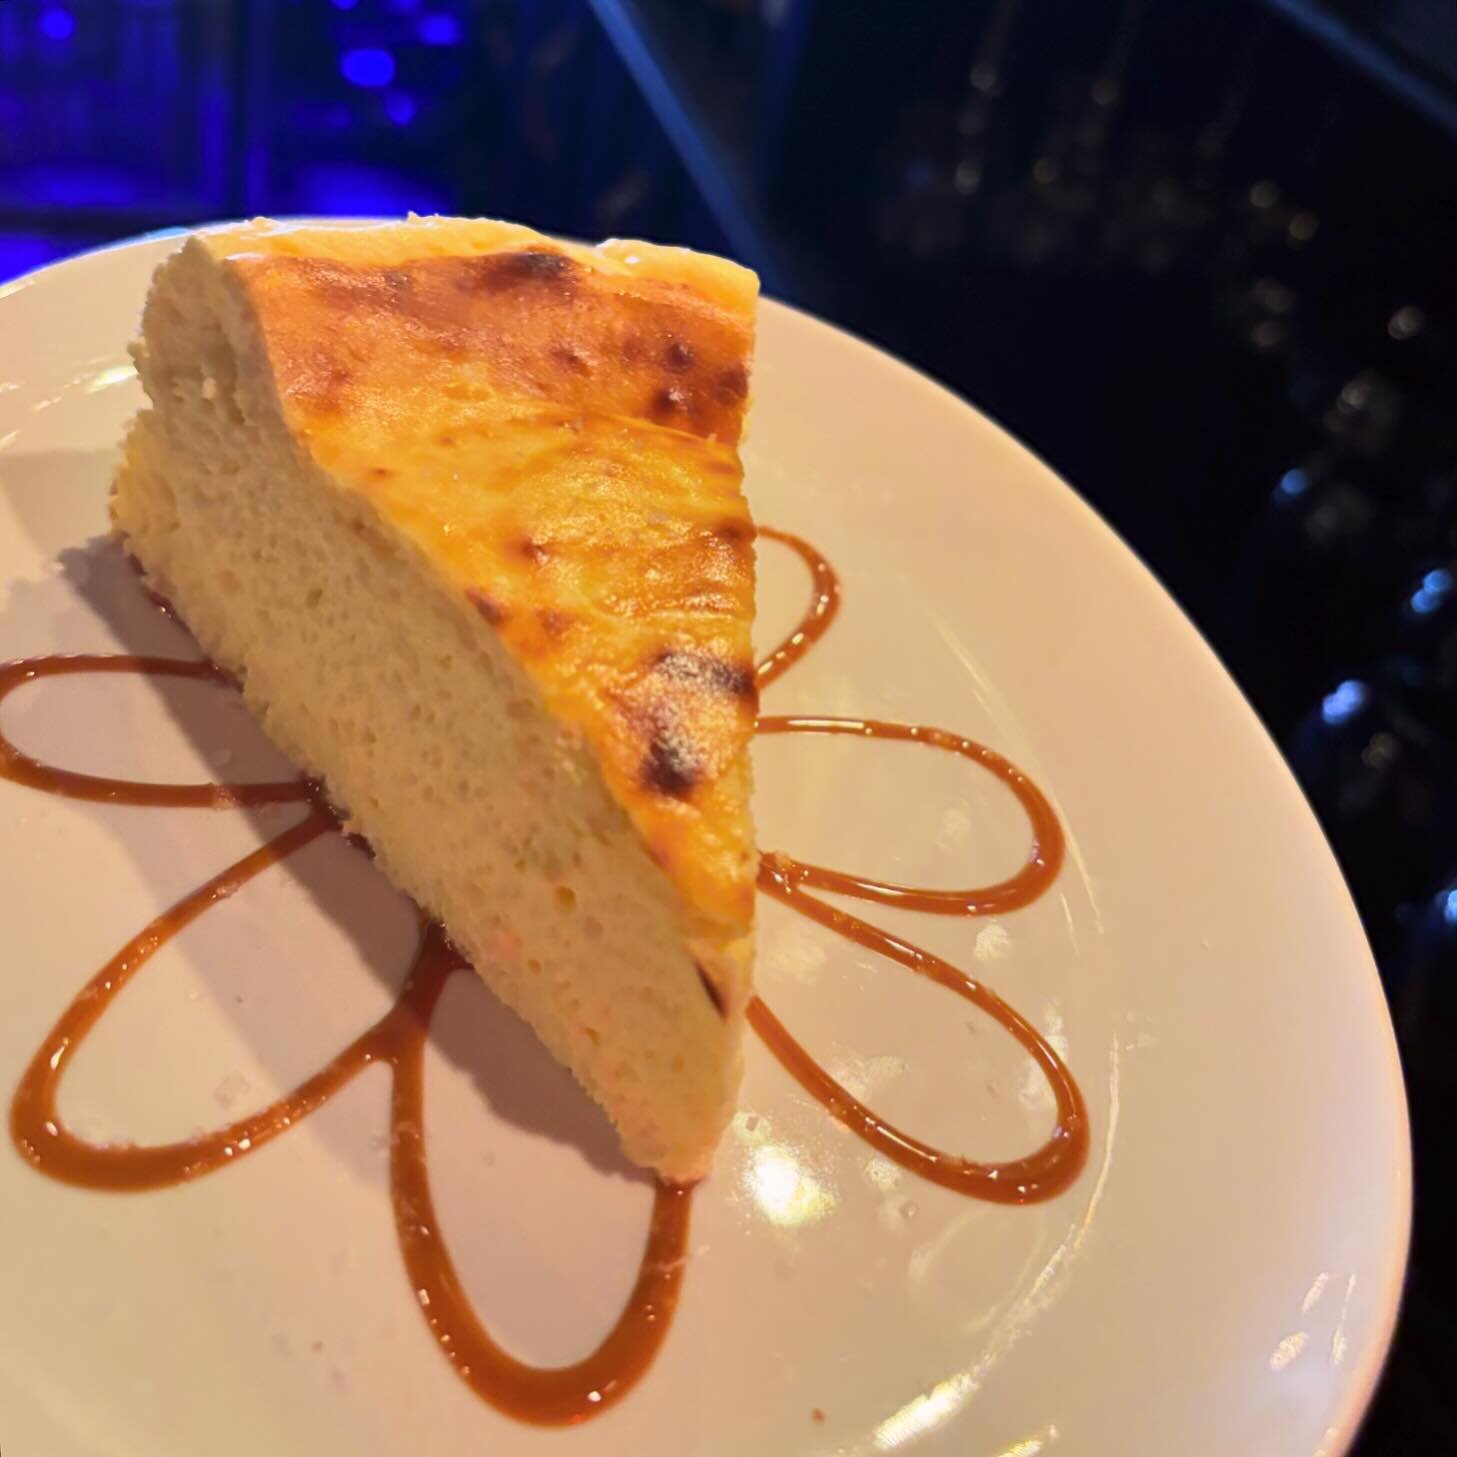 Basque Cheesecake 🪭
Creamy decadent whipped, with the classic burnt top, baked in house. 
It&rsquo;s seriously so good. 
Have you tried out Basque Cheesecake yet?